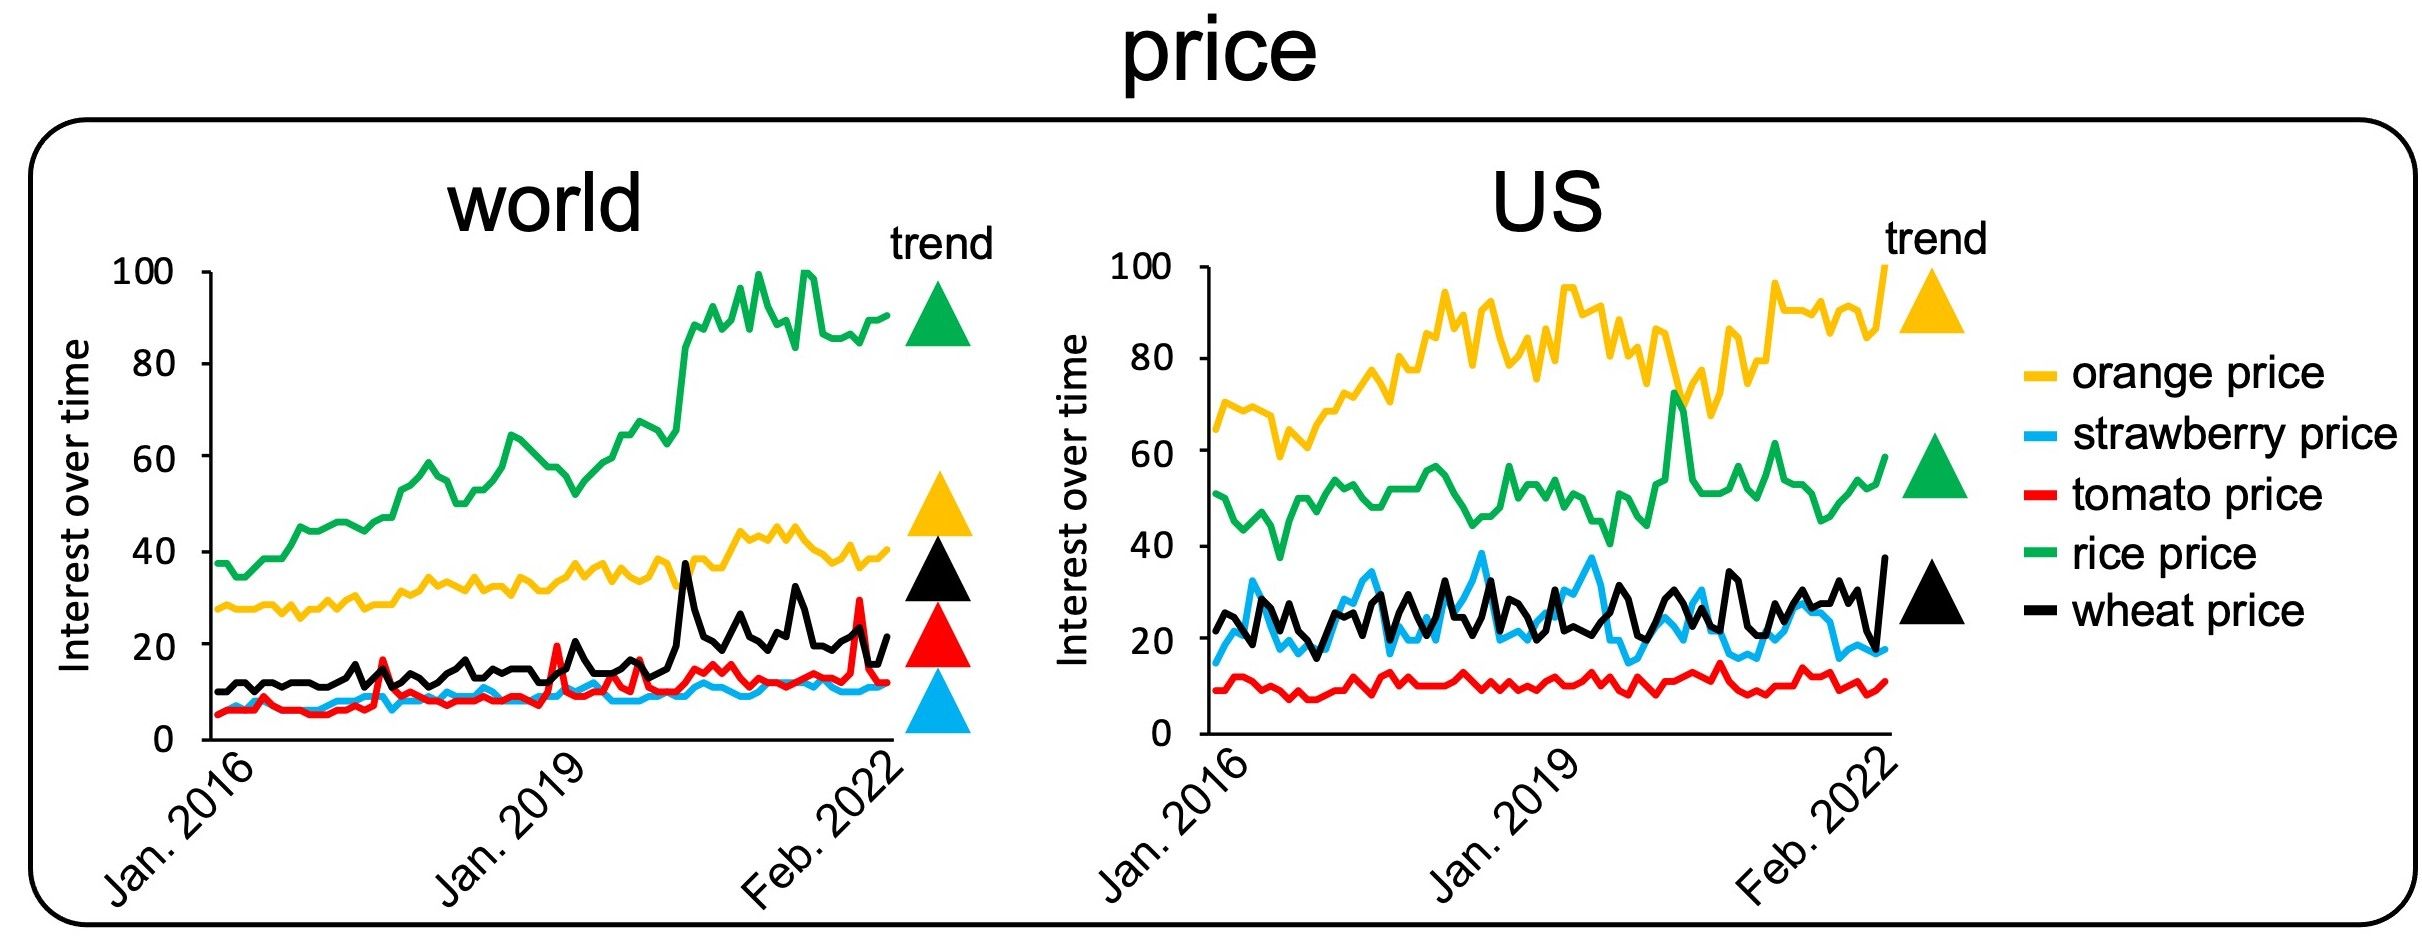 Search trends for “orange price,” “strawberry price,” “tomato price,” “rice price,” and “wheat price.” Ascending or descending triangles are shown if the change in search interest was statistically significant. Each triangle is color-coded based on the figure legend.  